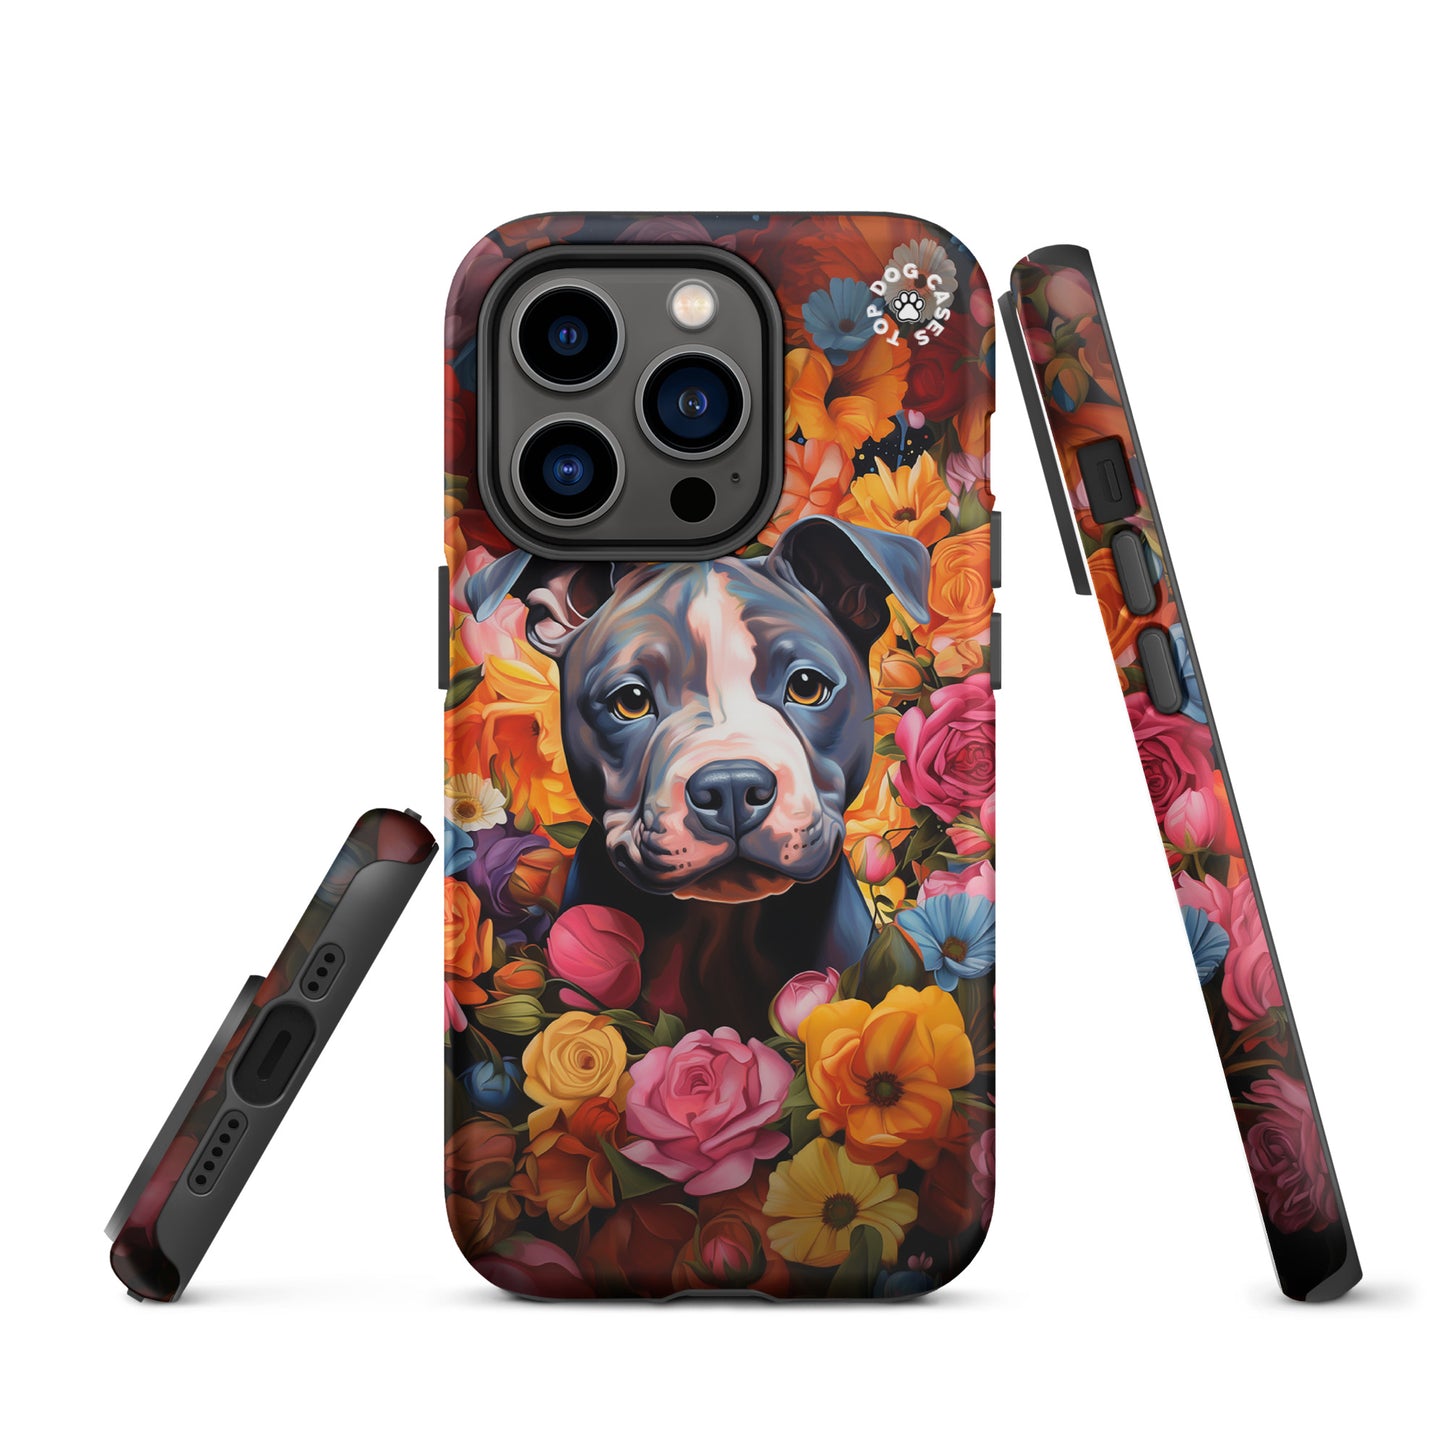 Pitbull Around Flowers Tough Case for iPhone - Top Dog Cases - #CuteDog, #CuteDogs, #DogPhoneCase, #DogsAndFlowers, #Flowers, #iPhone, #iPhone11, #iphone11case, #iPhone12, #iPhone12case, #iPhone13, #iPhone13case, #iPhone13DogCase, #iPhone13Mini, #iPhone13Pro, #iPhone13ProMax, #iPhone14, #iPhone14case, #iPhone14DogCase, #iPhone14Plus, #iPhone14Pluscase, #iPhone14Pro, #iPhone14ProMax, #iPhone14ProMaxCase, #iPhone15, #iPhone15case, #iPhonecase, #iphonedogcase, #Pitbull